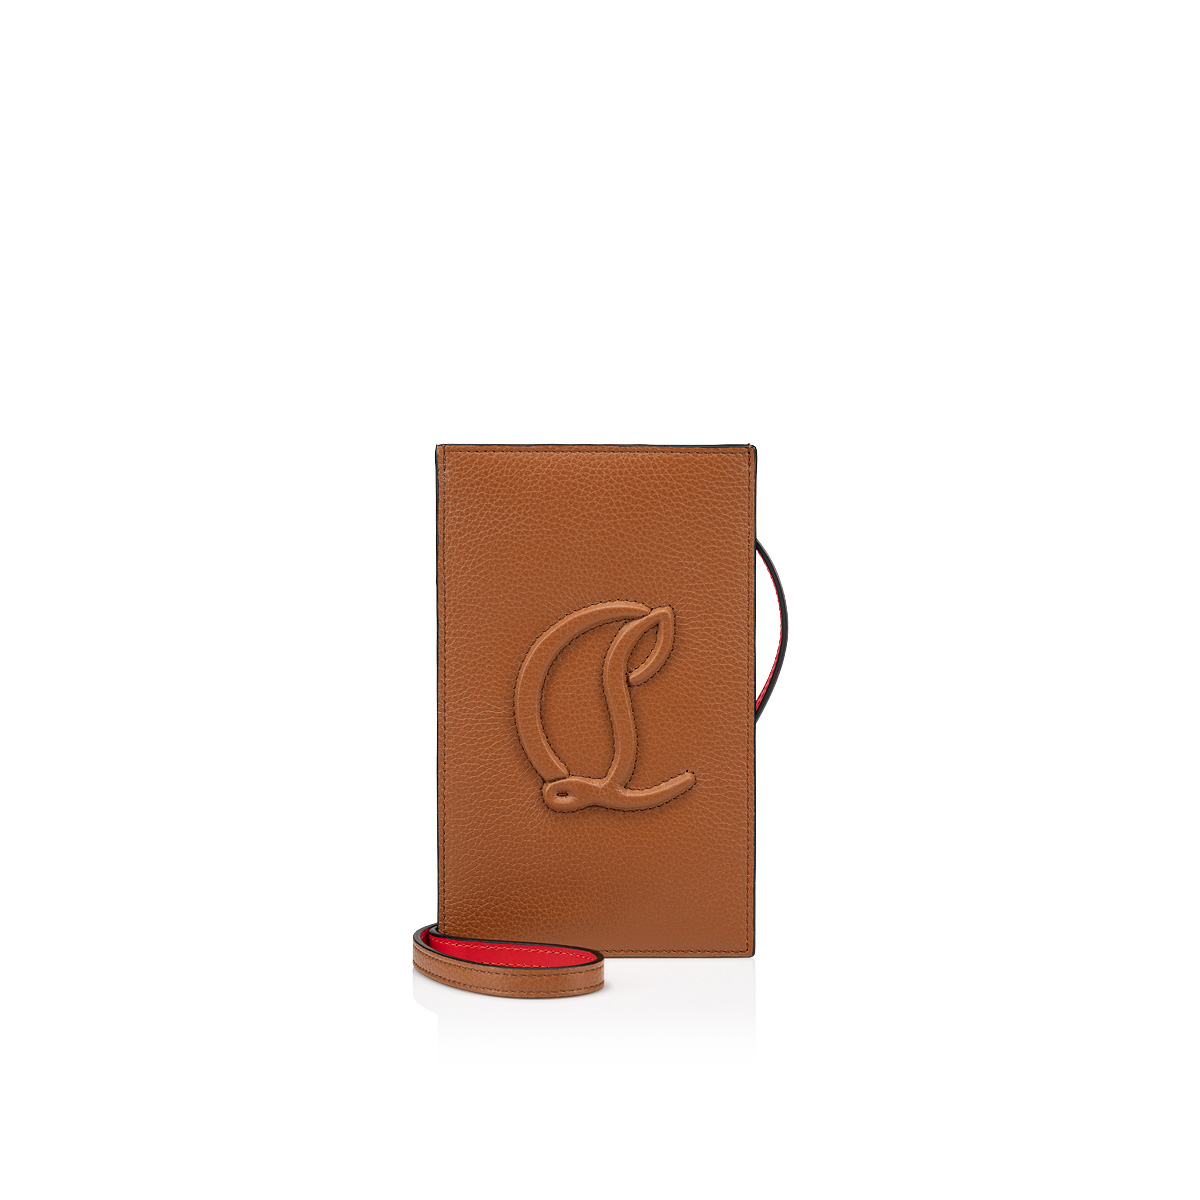 Christian Louboutin Leather by My Side Phone Pouch - Brown - One Size